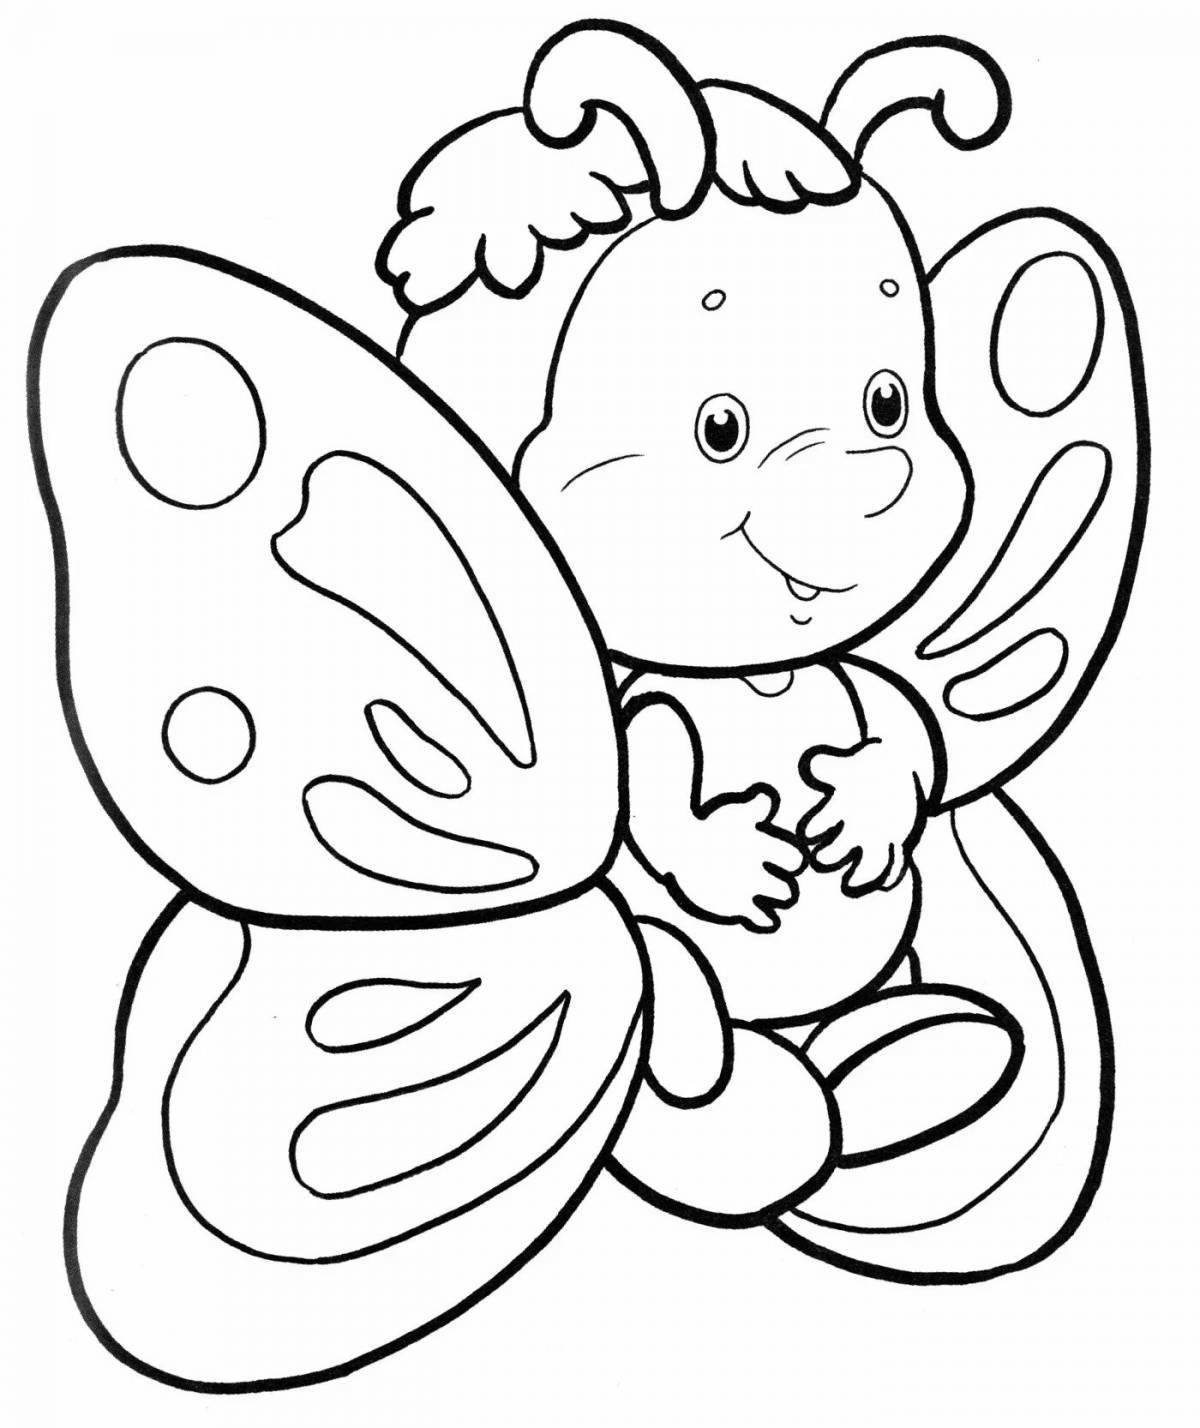 Animated butterfly coloring book for kids